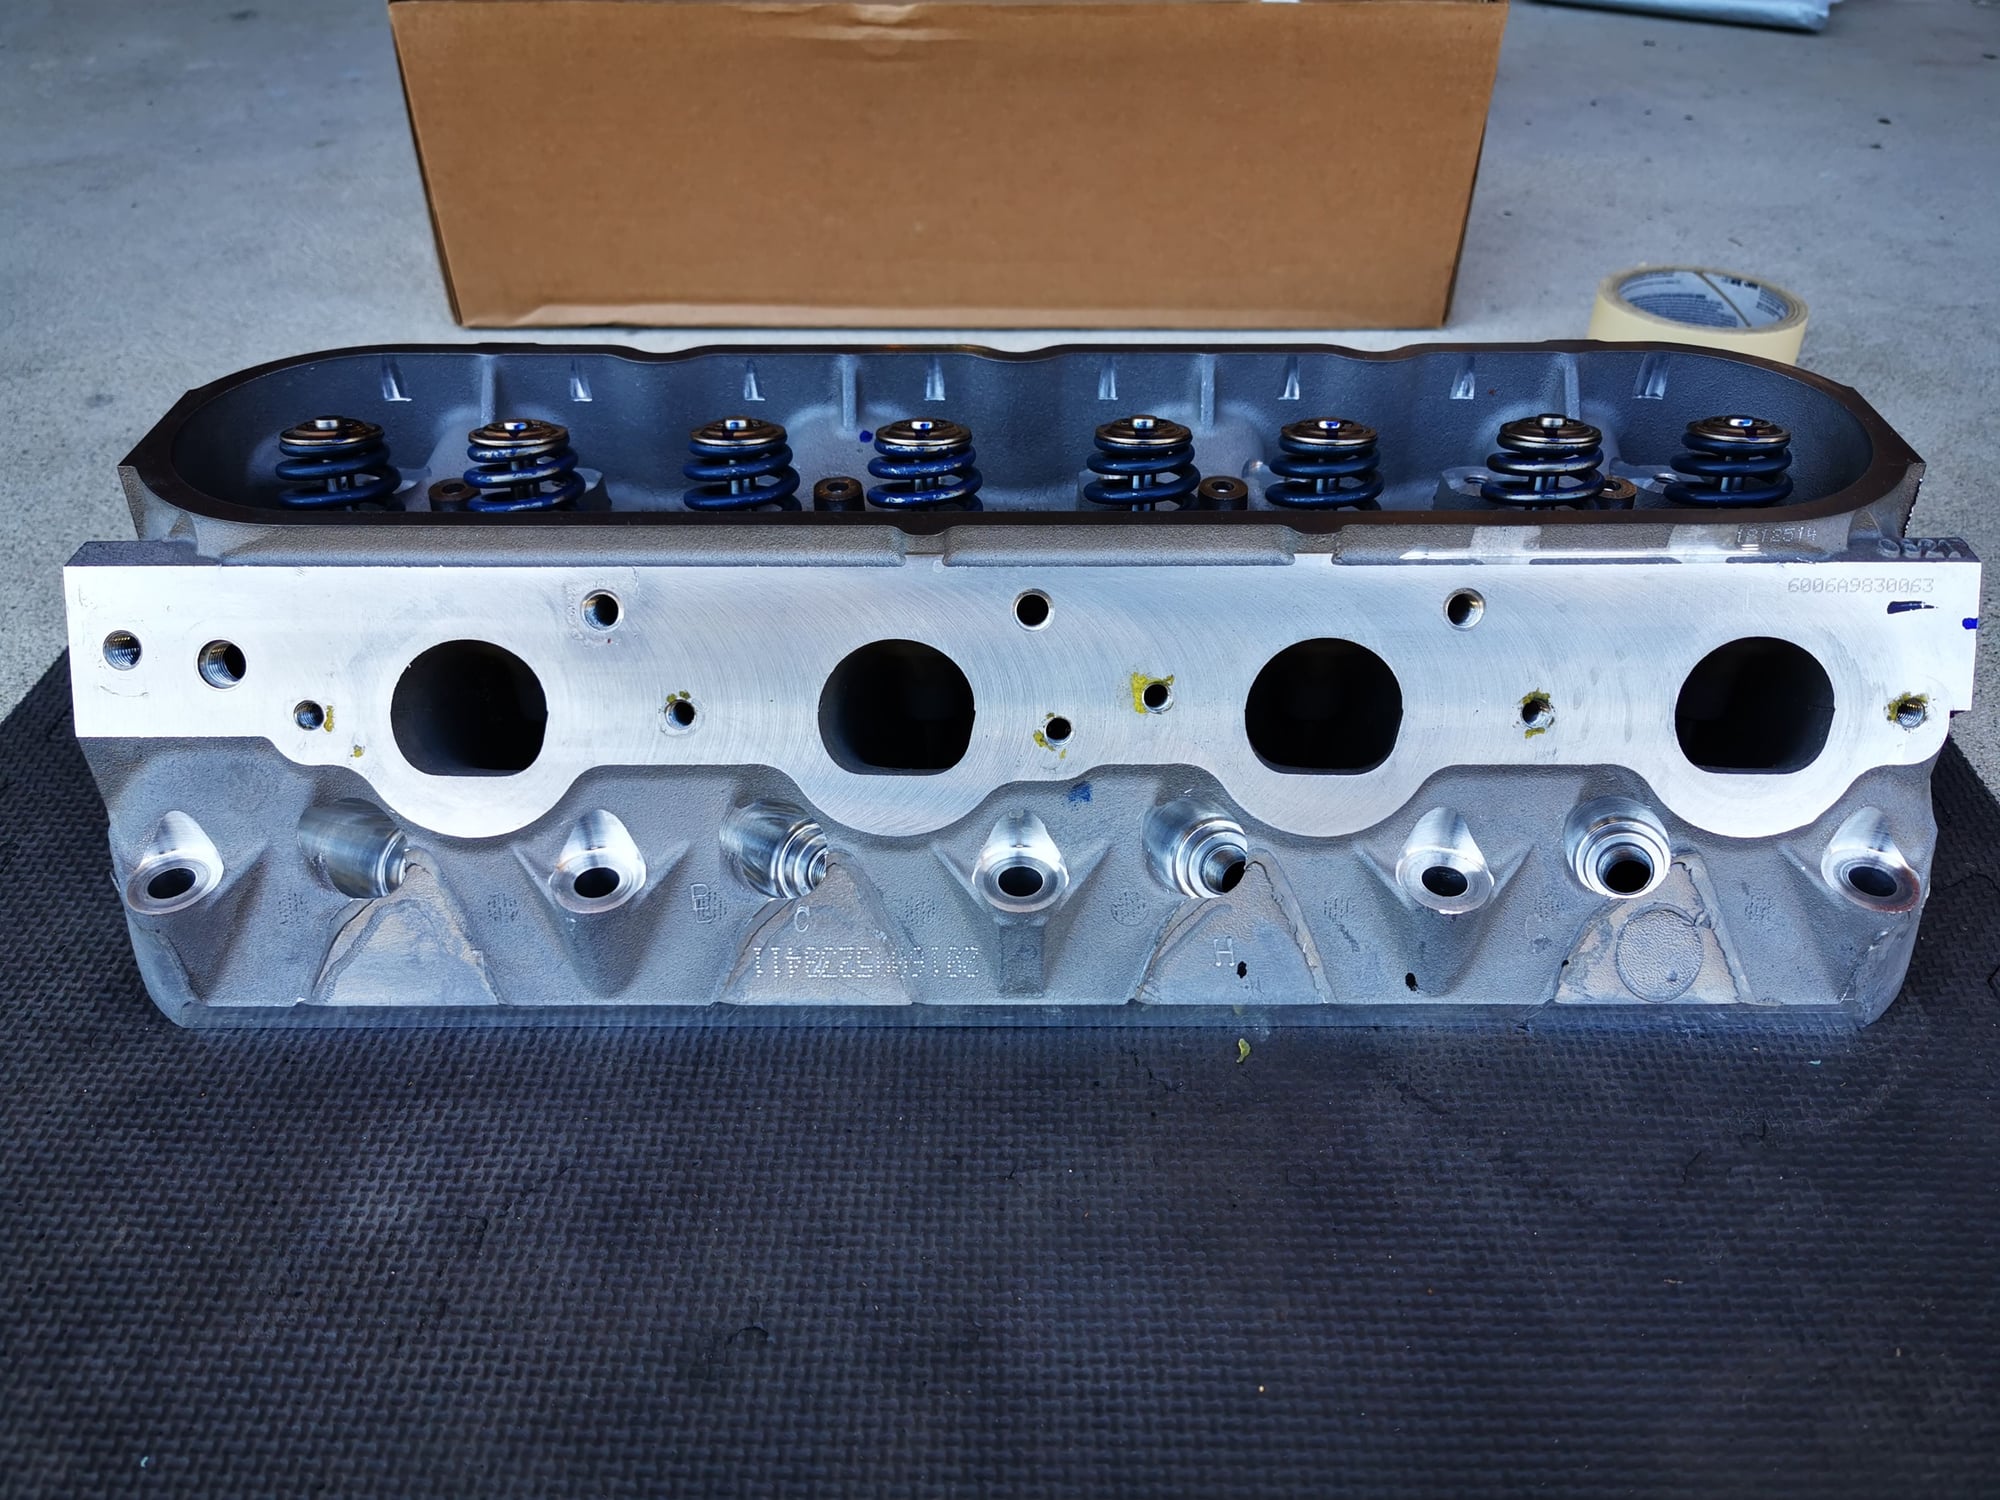 Engine - Internals - LS3 Cylinder Heads [0821], New [x2] - New - 2008 to 2013 Chevrolet Corvette - South Pasadena, CA 91030, United States